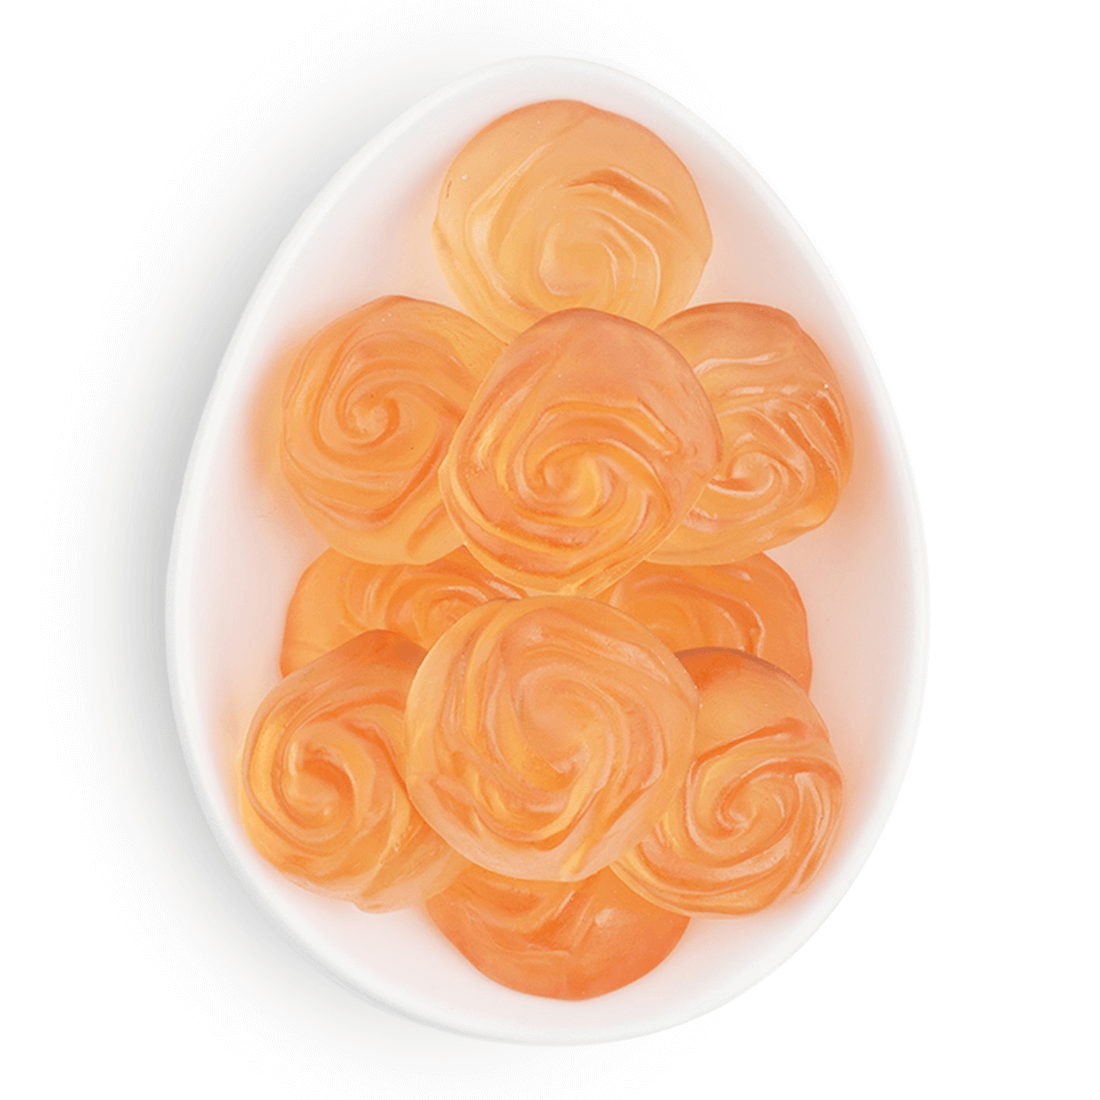 Small white ceramic dish holding rose-shaped pink gummy candies.